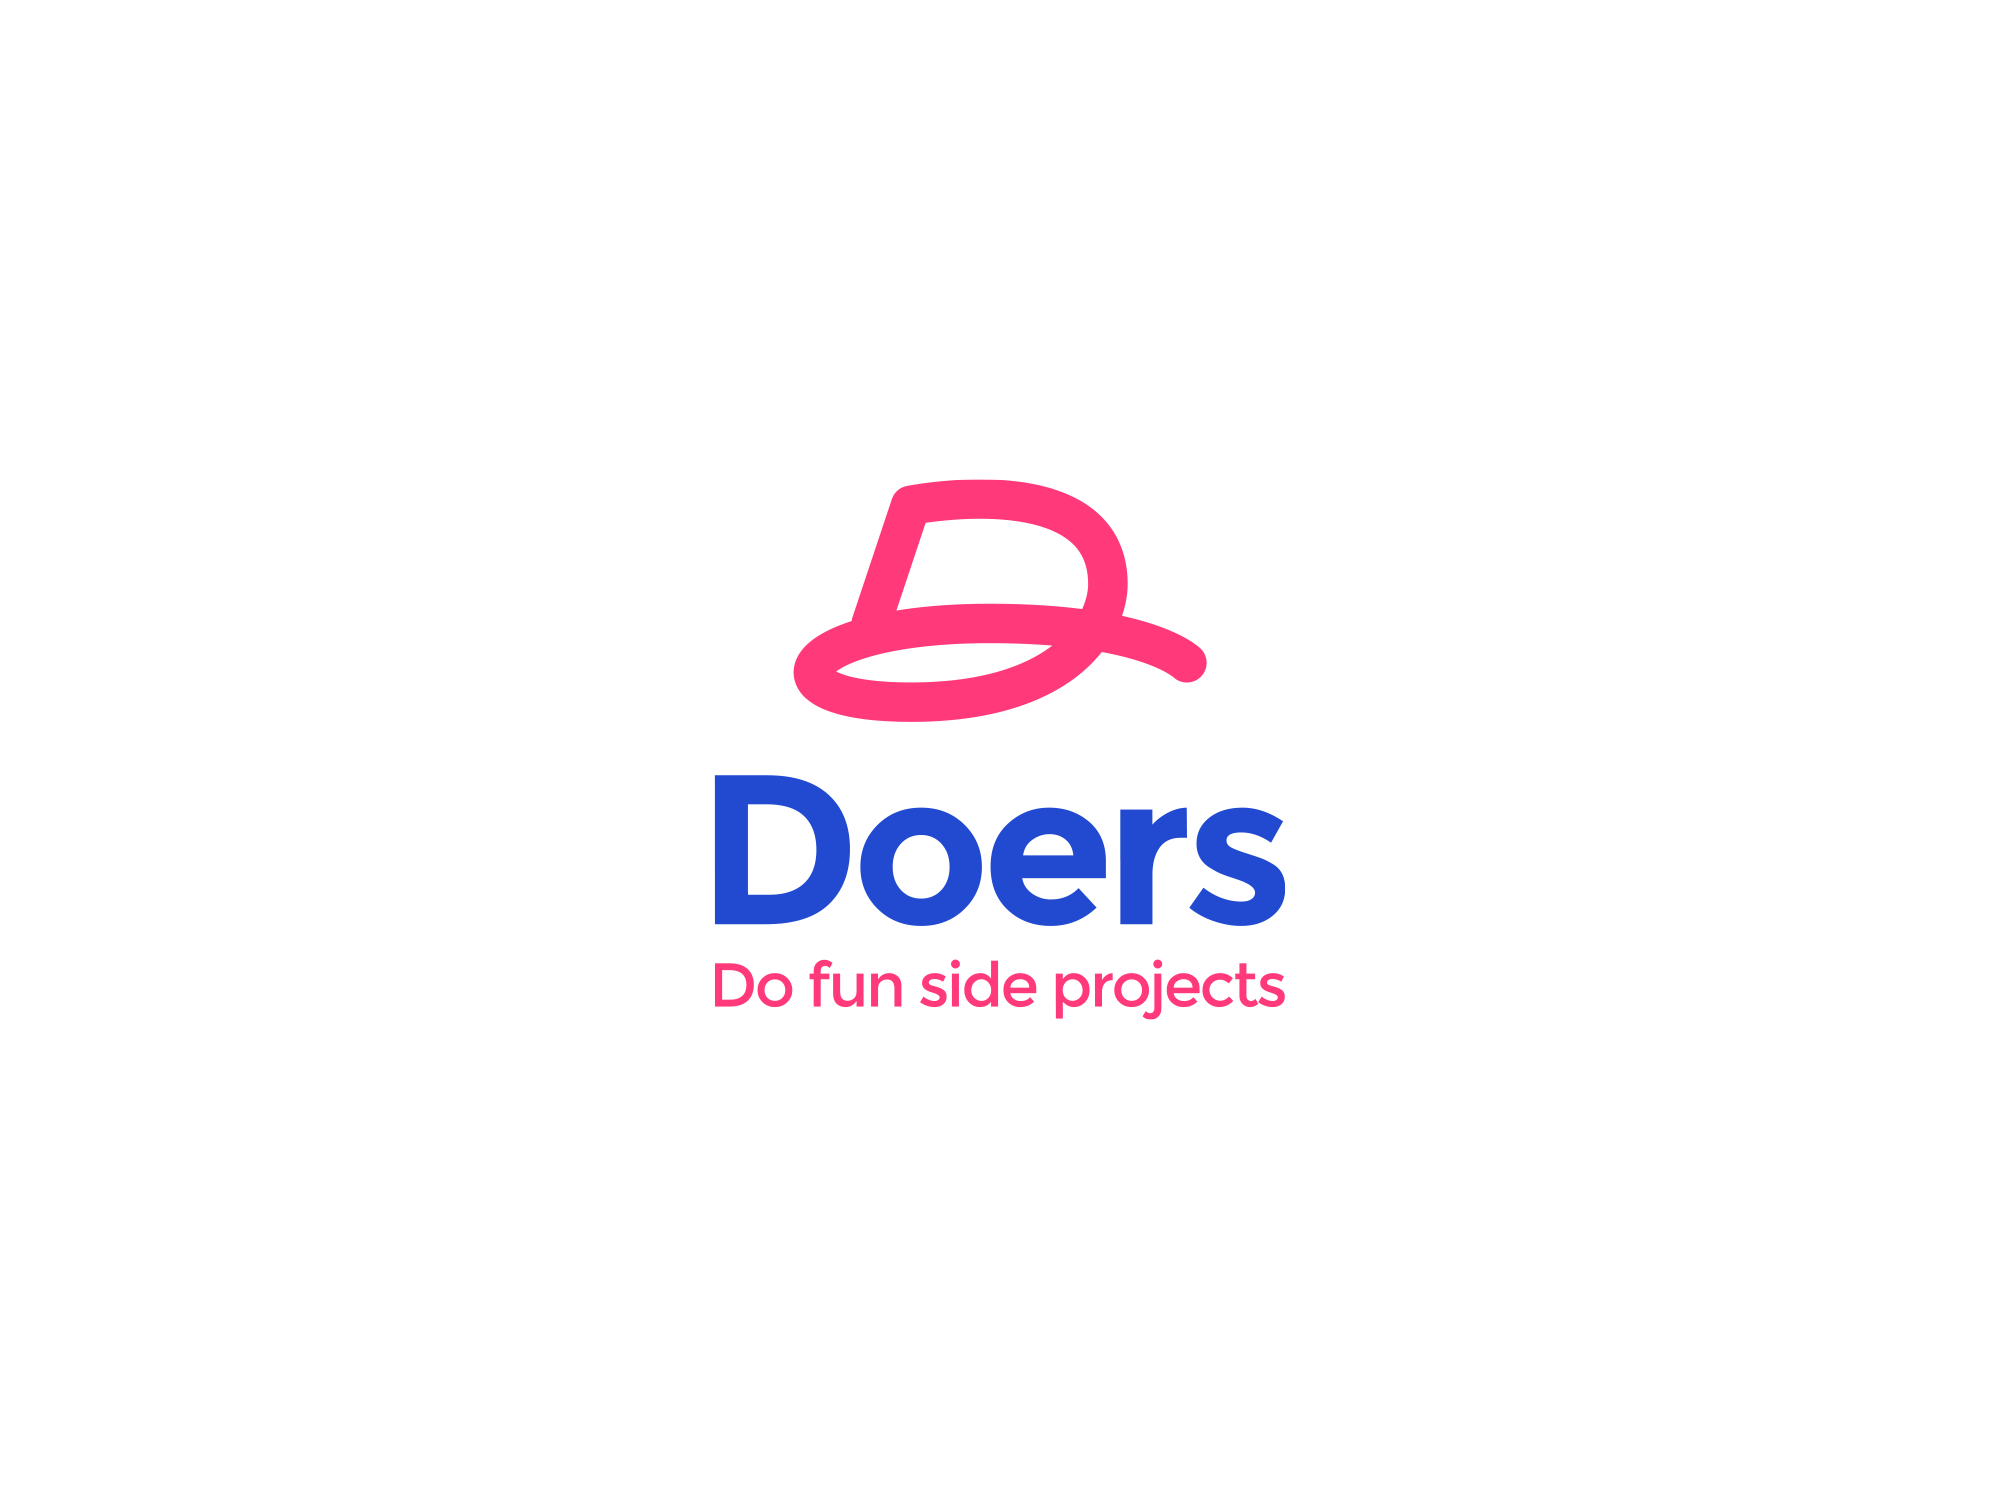 Logo created for Doers - Do fun side projects